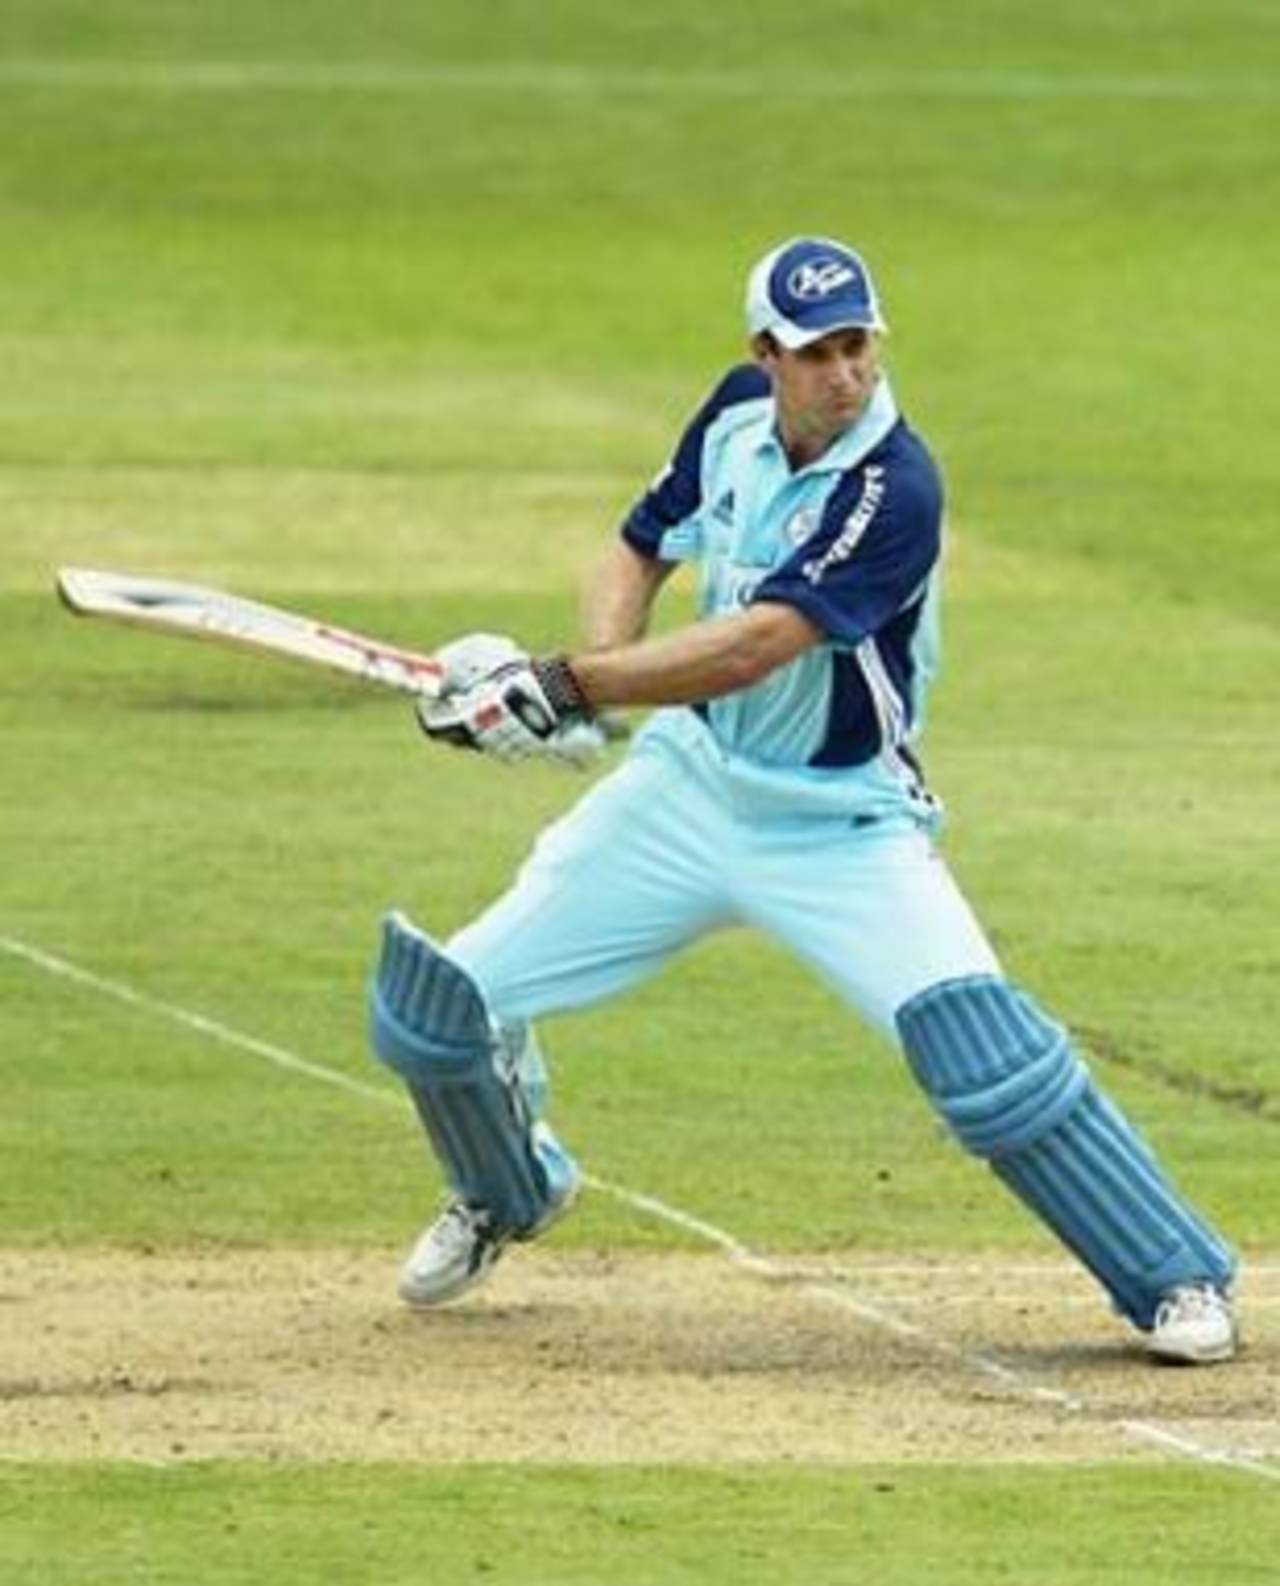 Simon Katich cuts on his way to 51, New South Wales v Queensland, Sydney, November 13, 2005